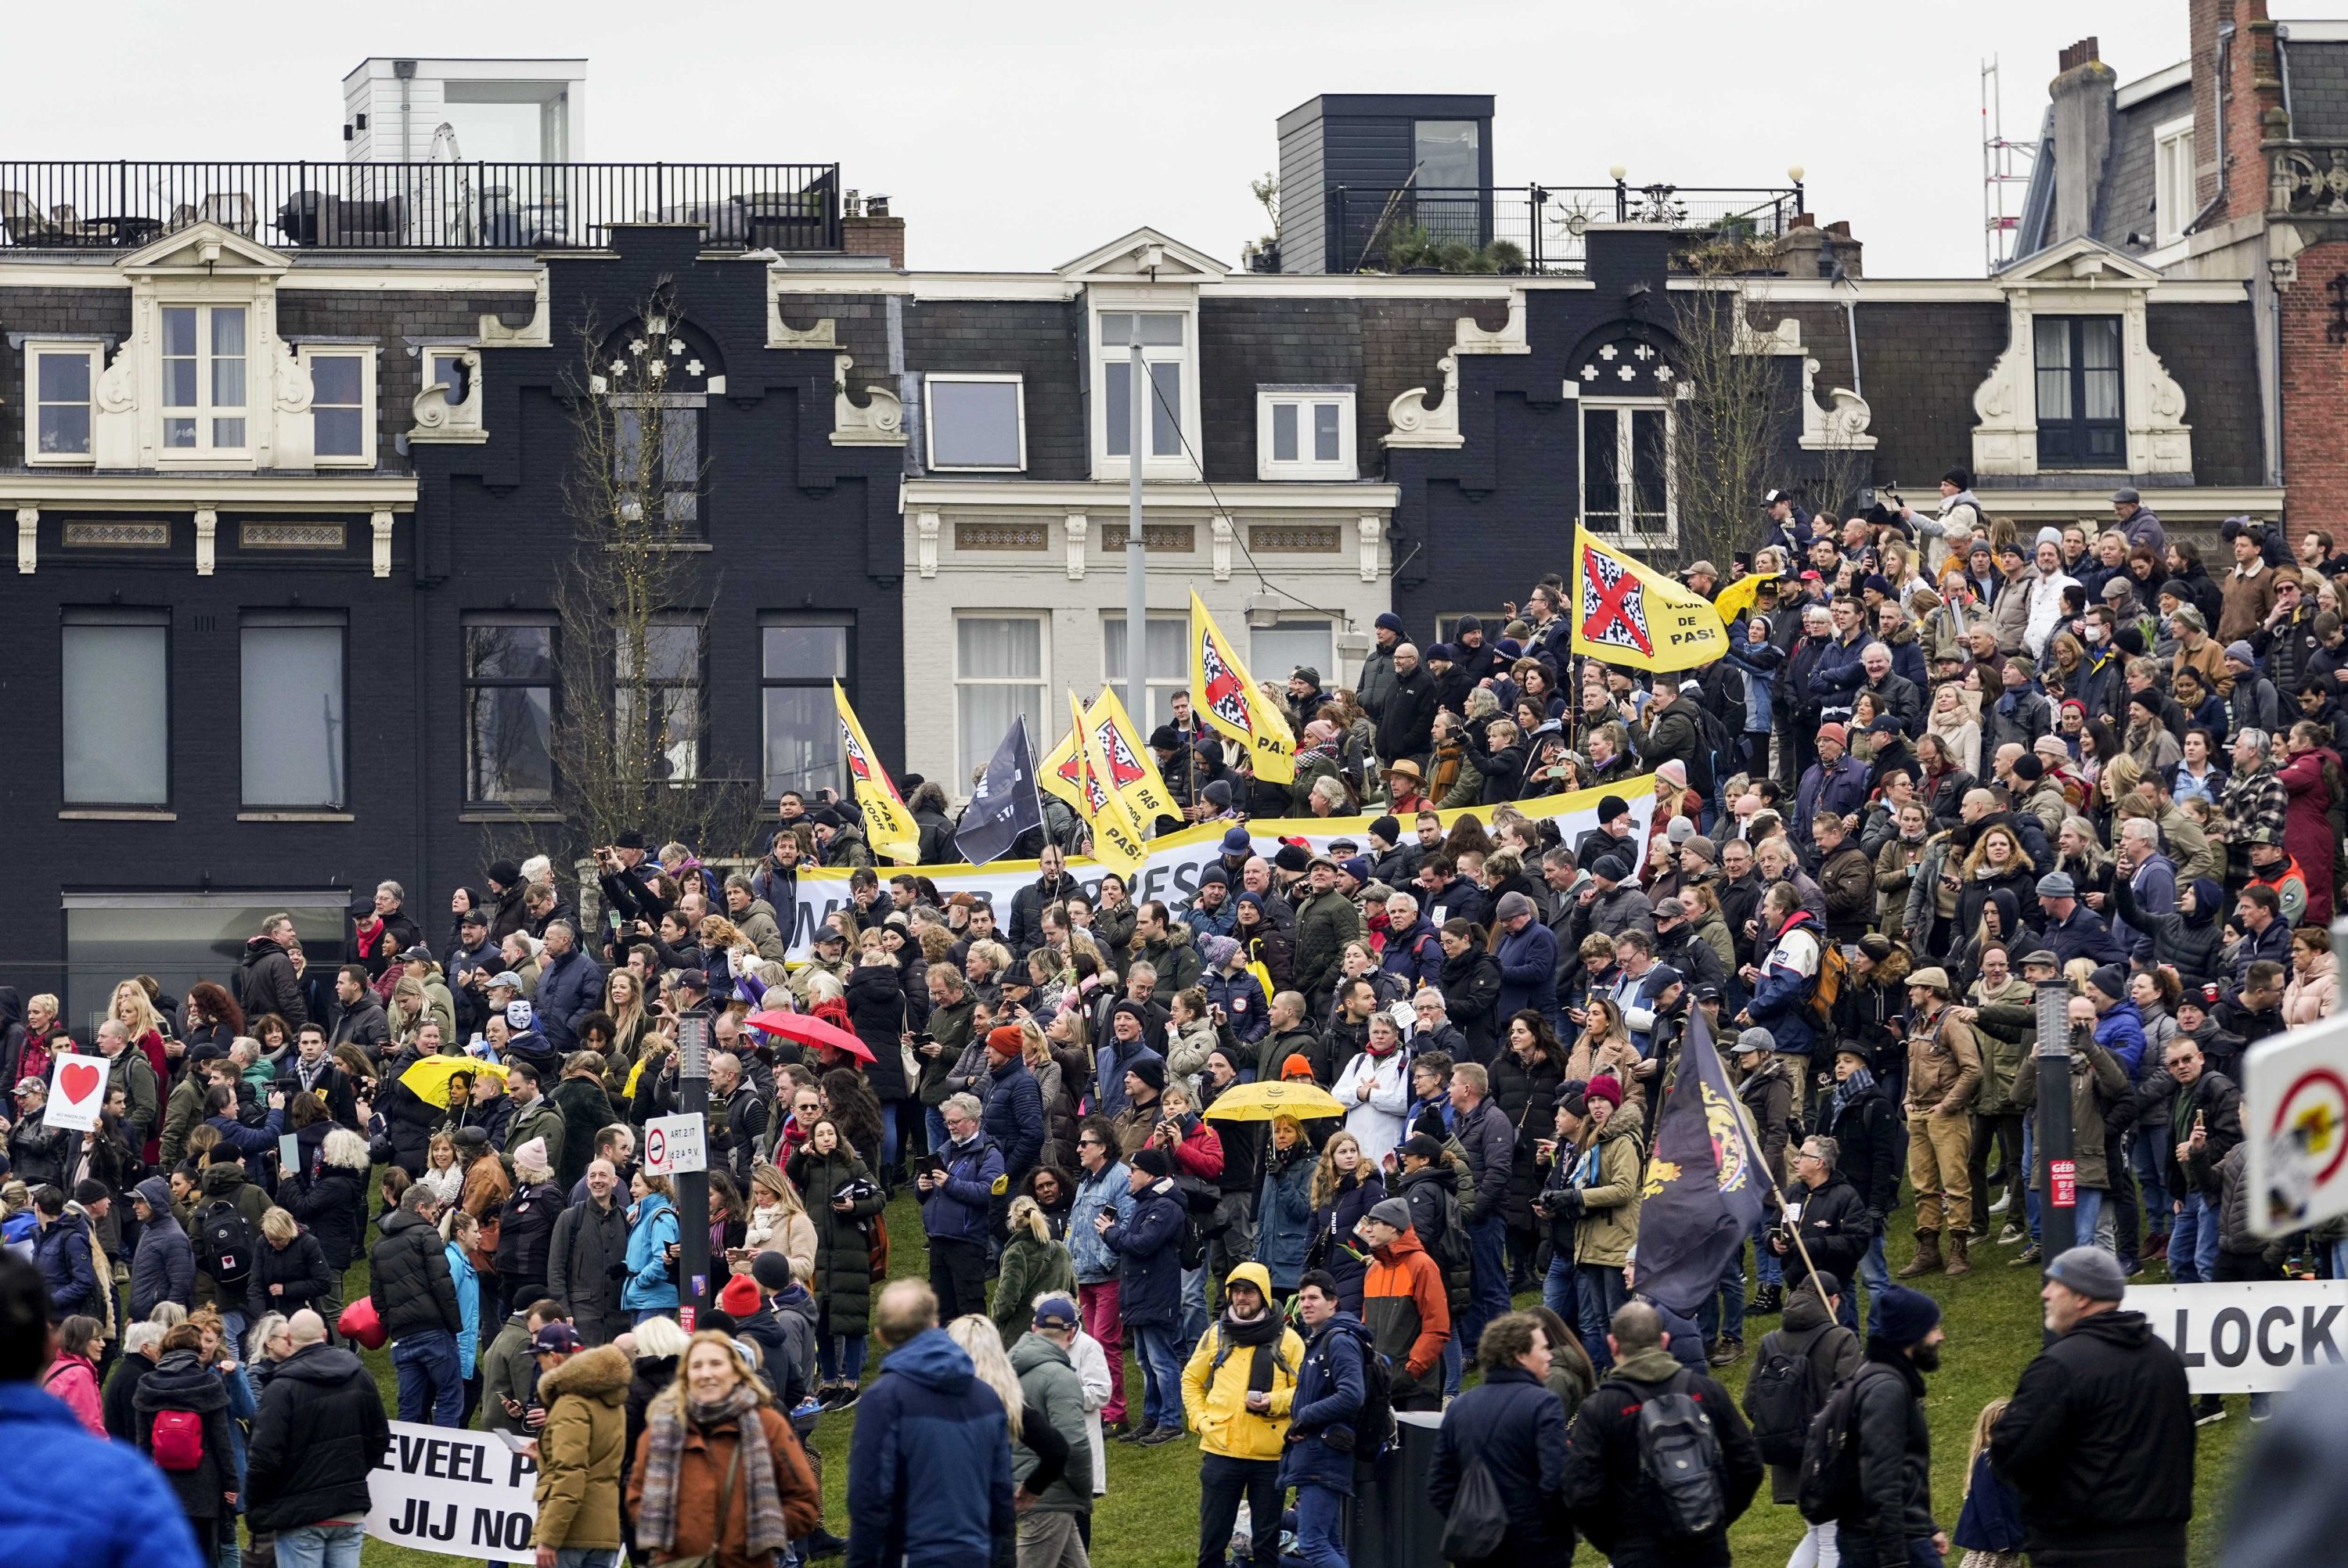 Thousands take to streets to protest Dutch COVID-19 policies | Daily Sabah